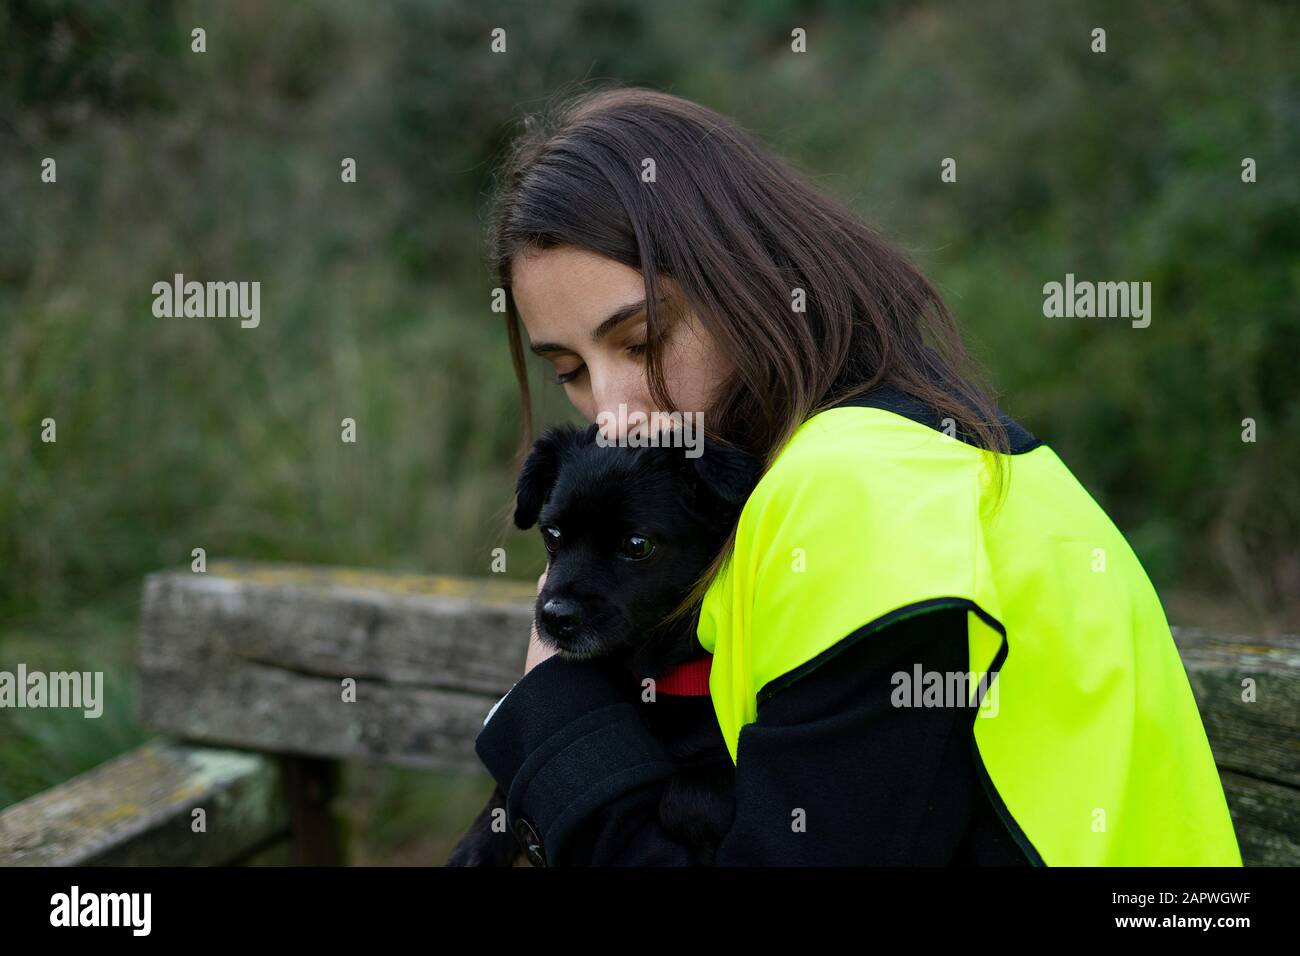 Kennel volunteer hugging an abandoned dog. Concept of volunteer and animal abuse. Stock Photo